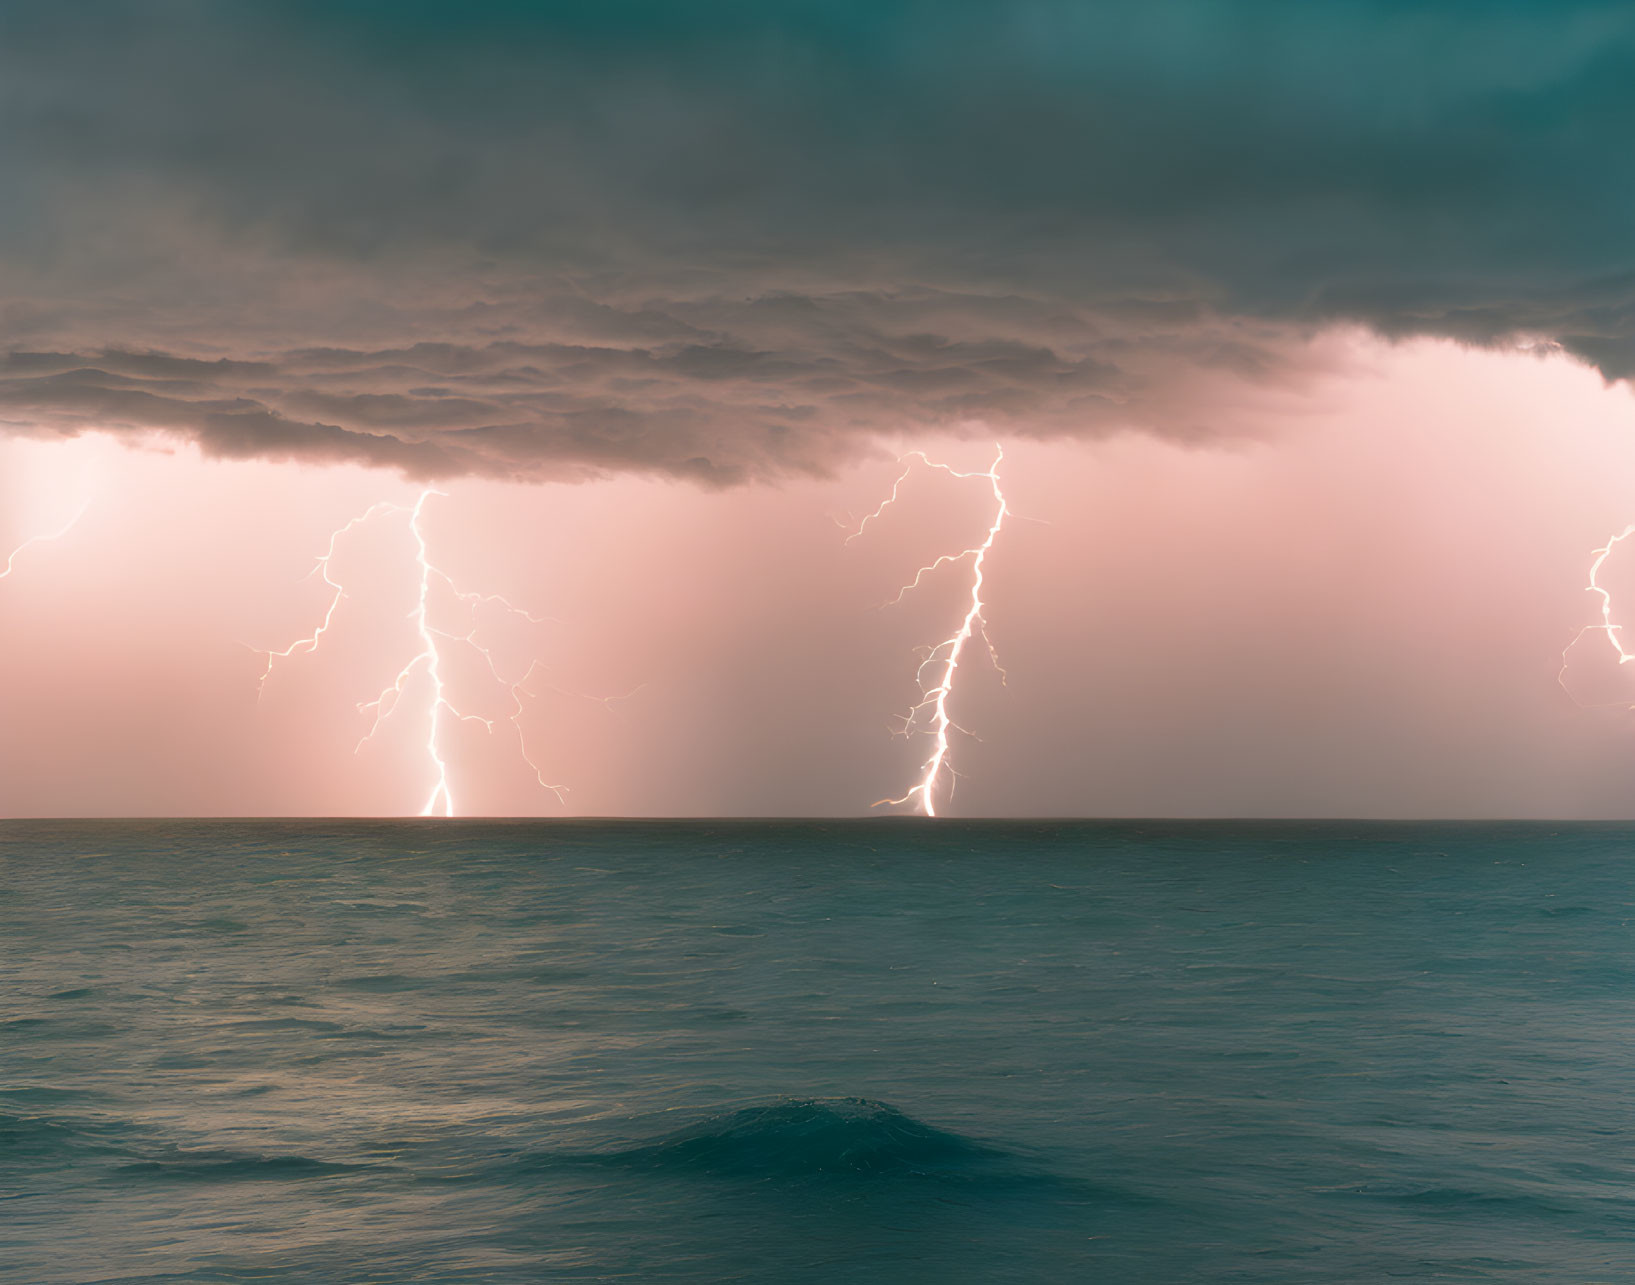 Stormy Seascape with Lightning Bolts Over Ocean